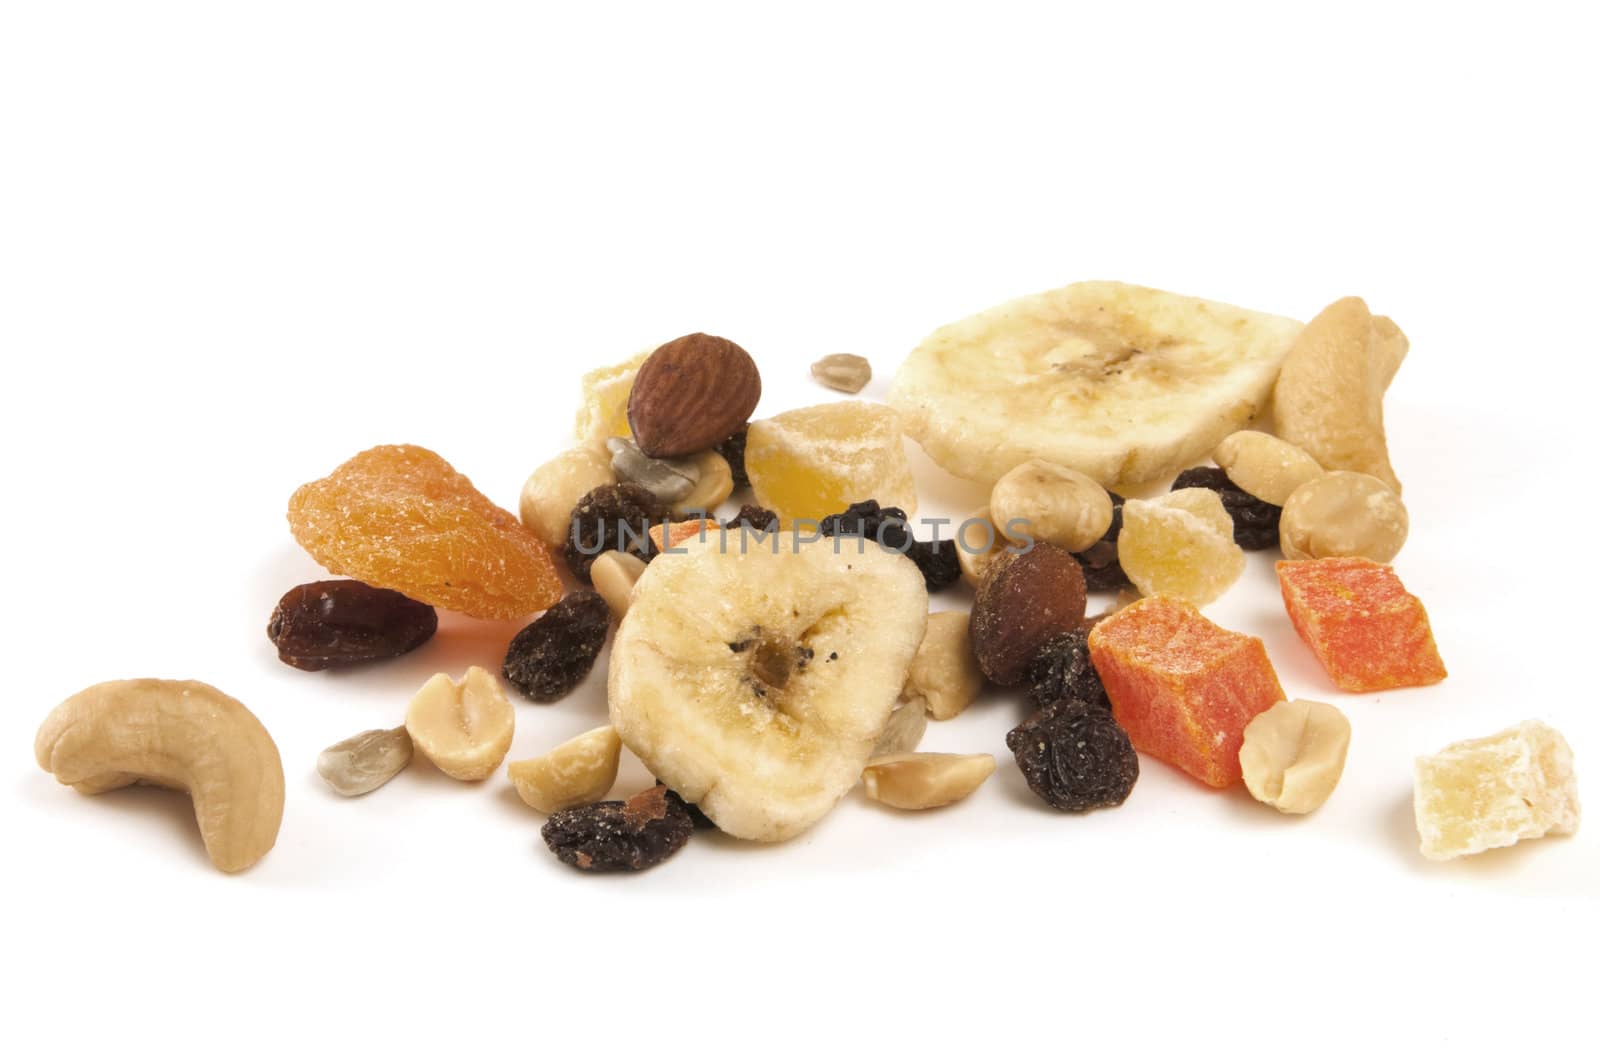 Focus on dried fruit and nuts on white background